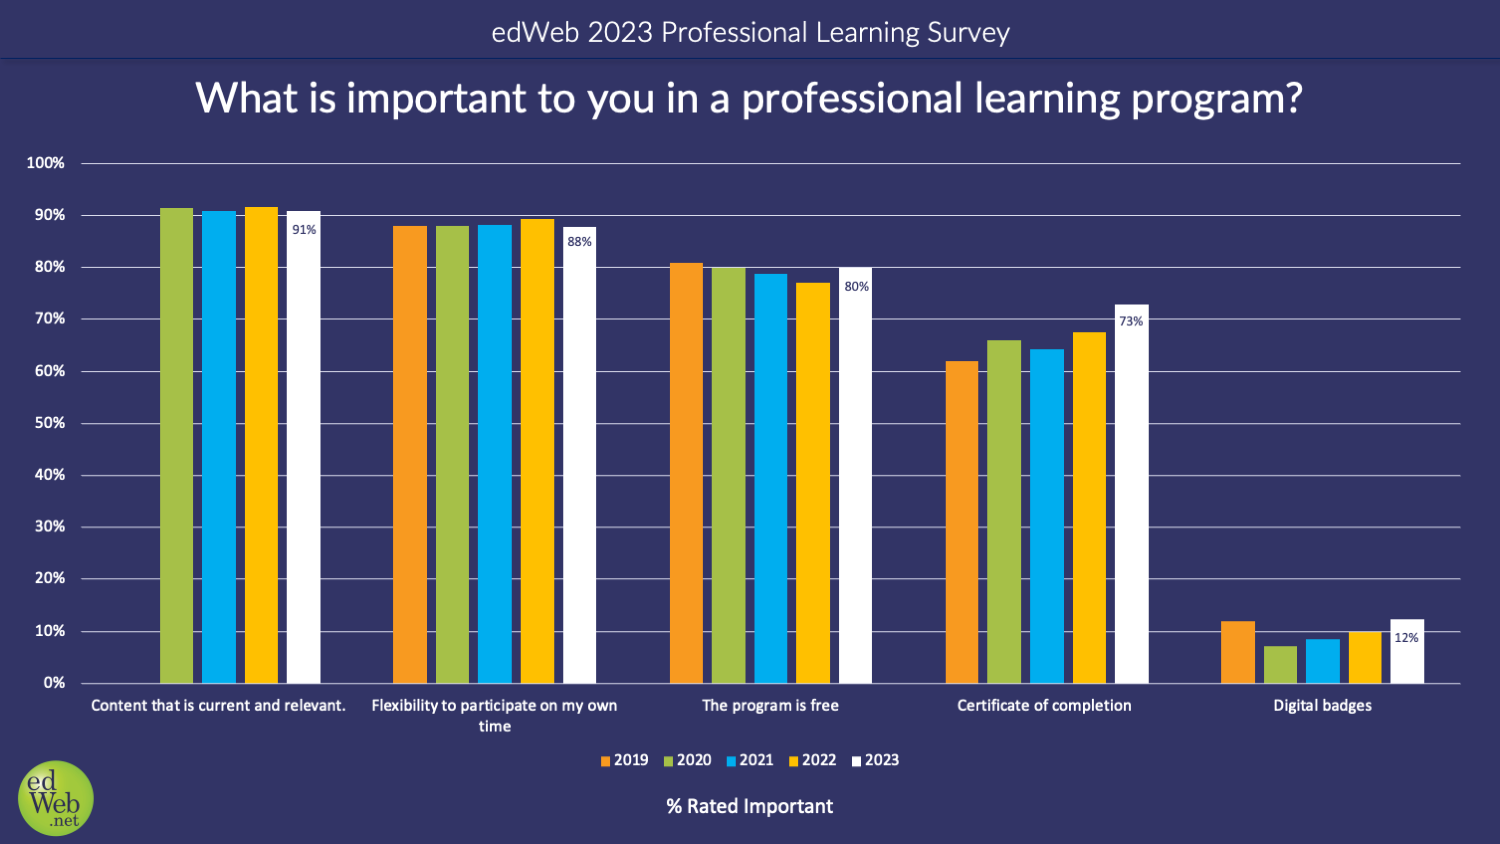 What is important to you in a professional learning program?